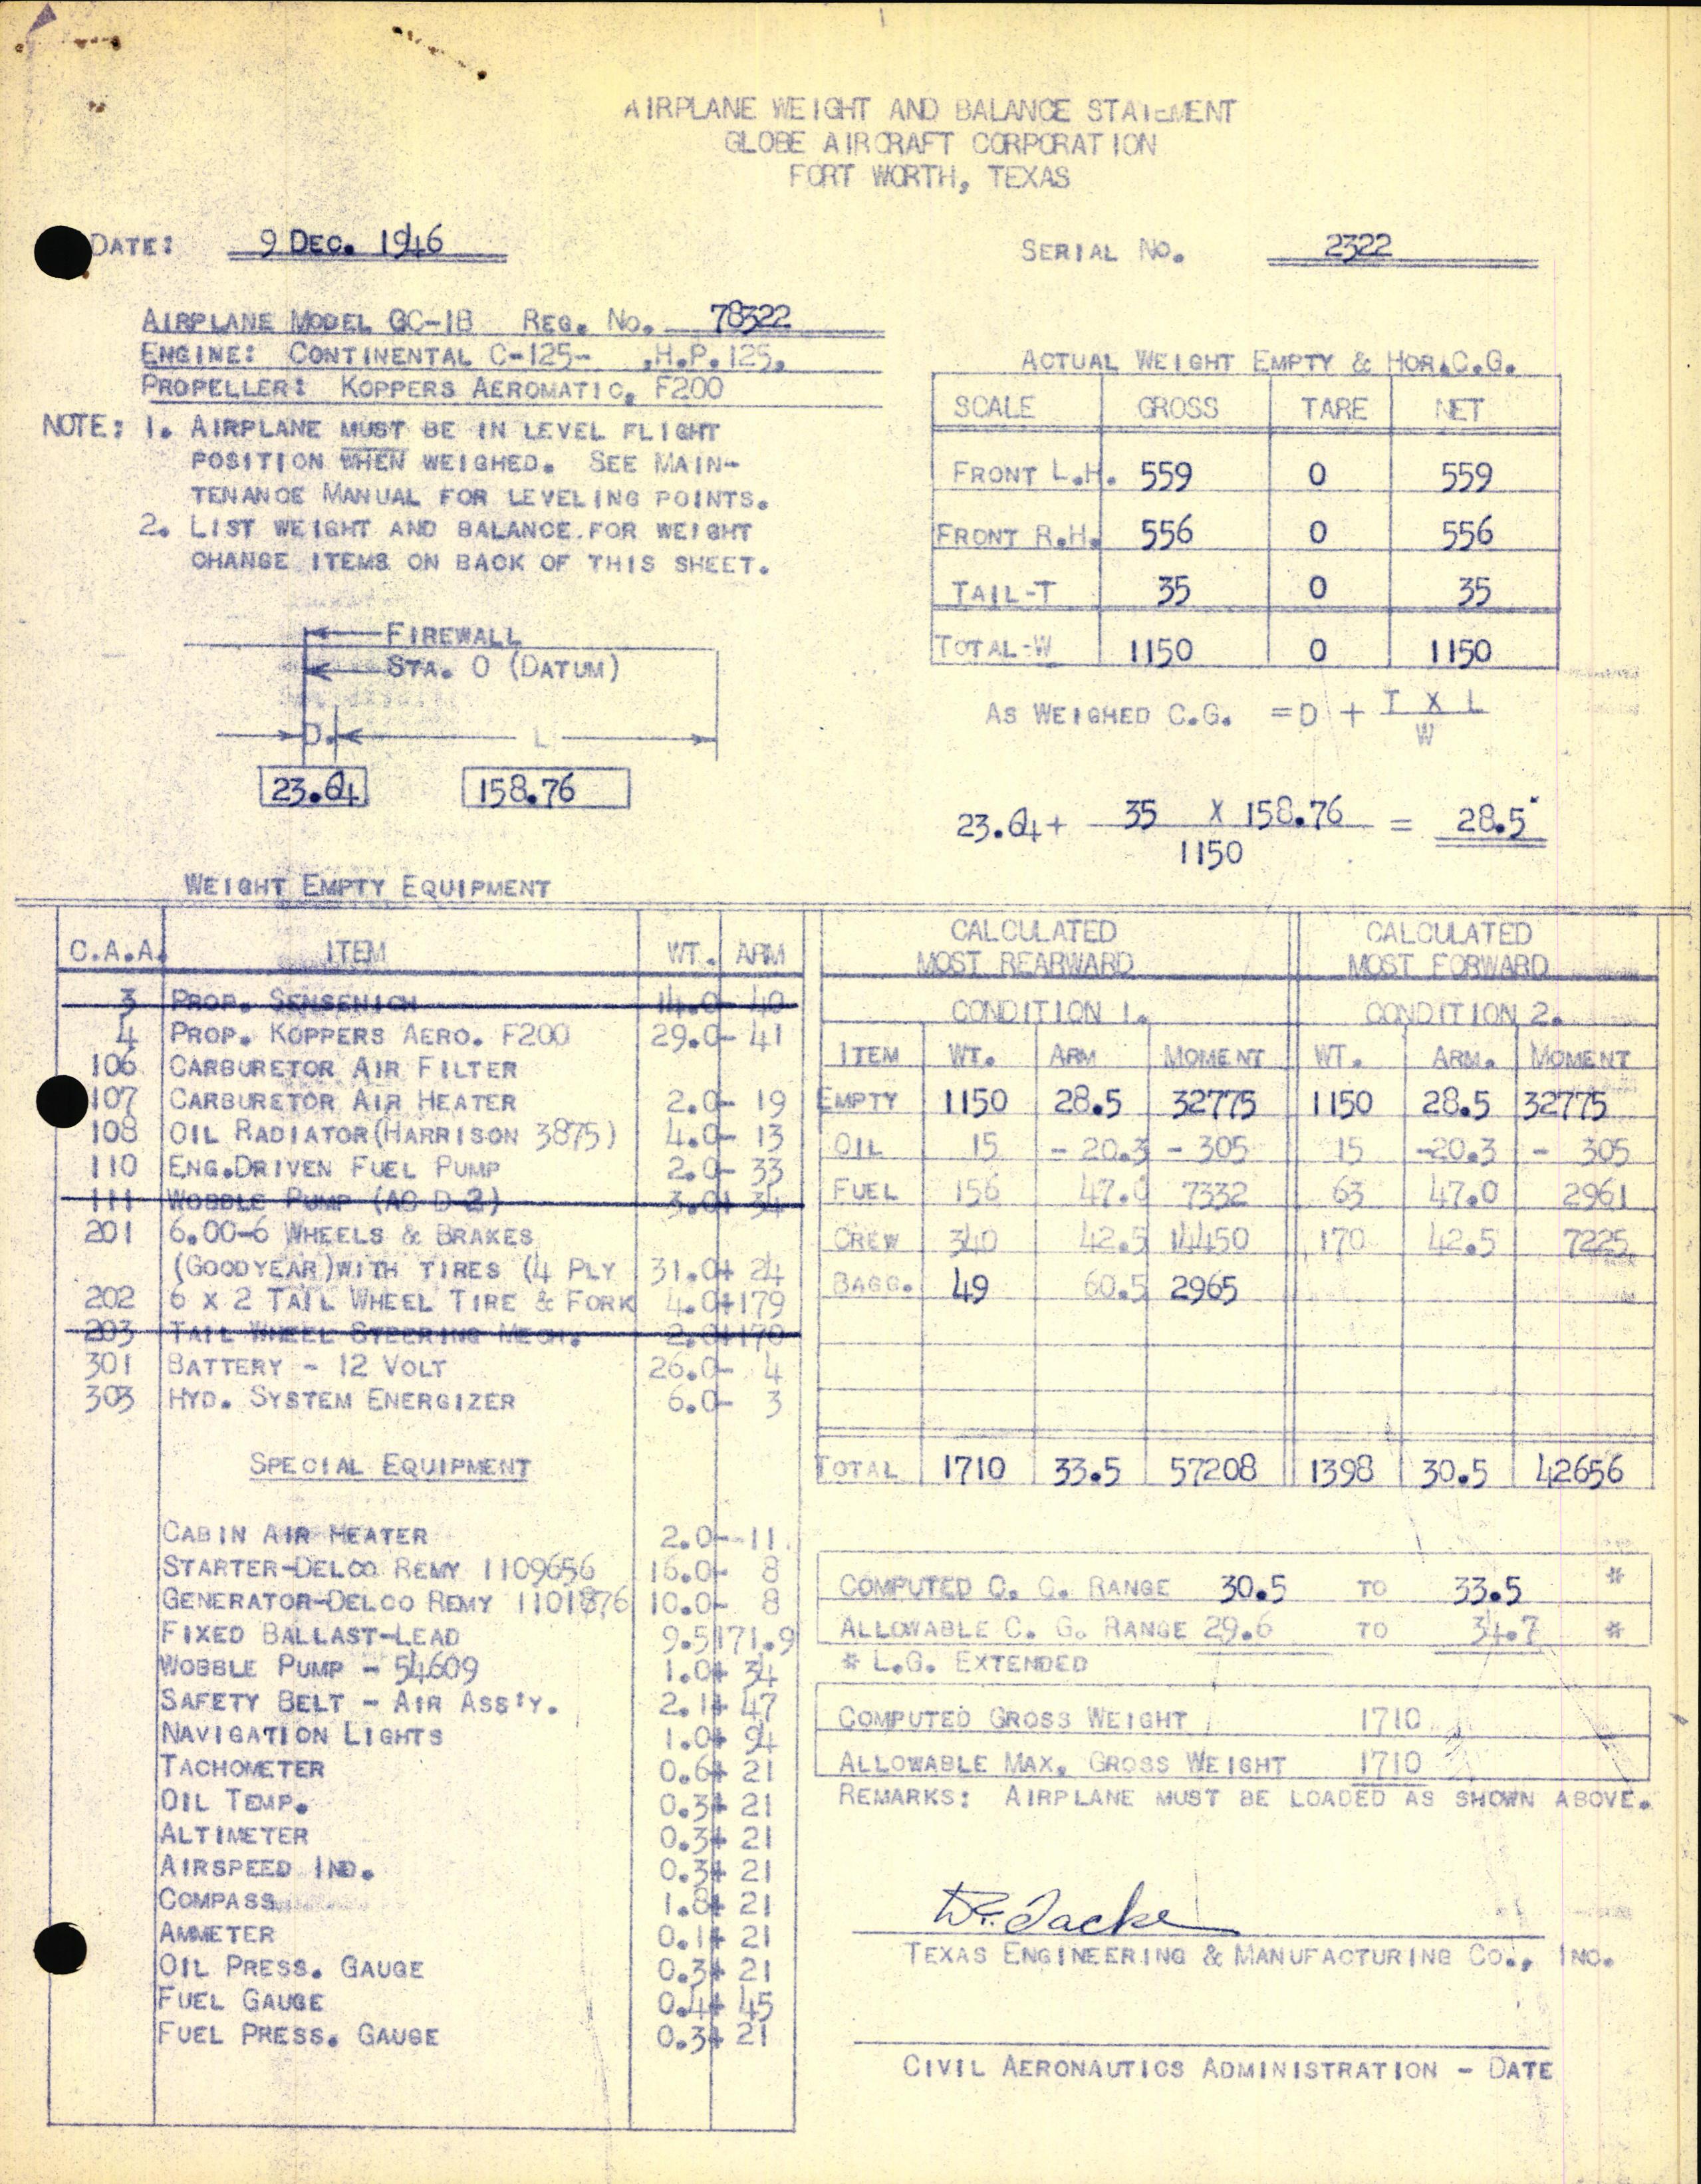 Sample page 3 from AirCorps Library document: Technical Information for Serial Number 2322